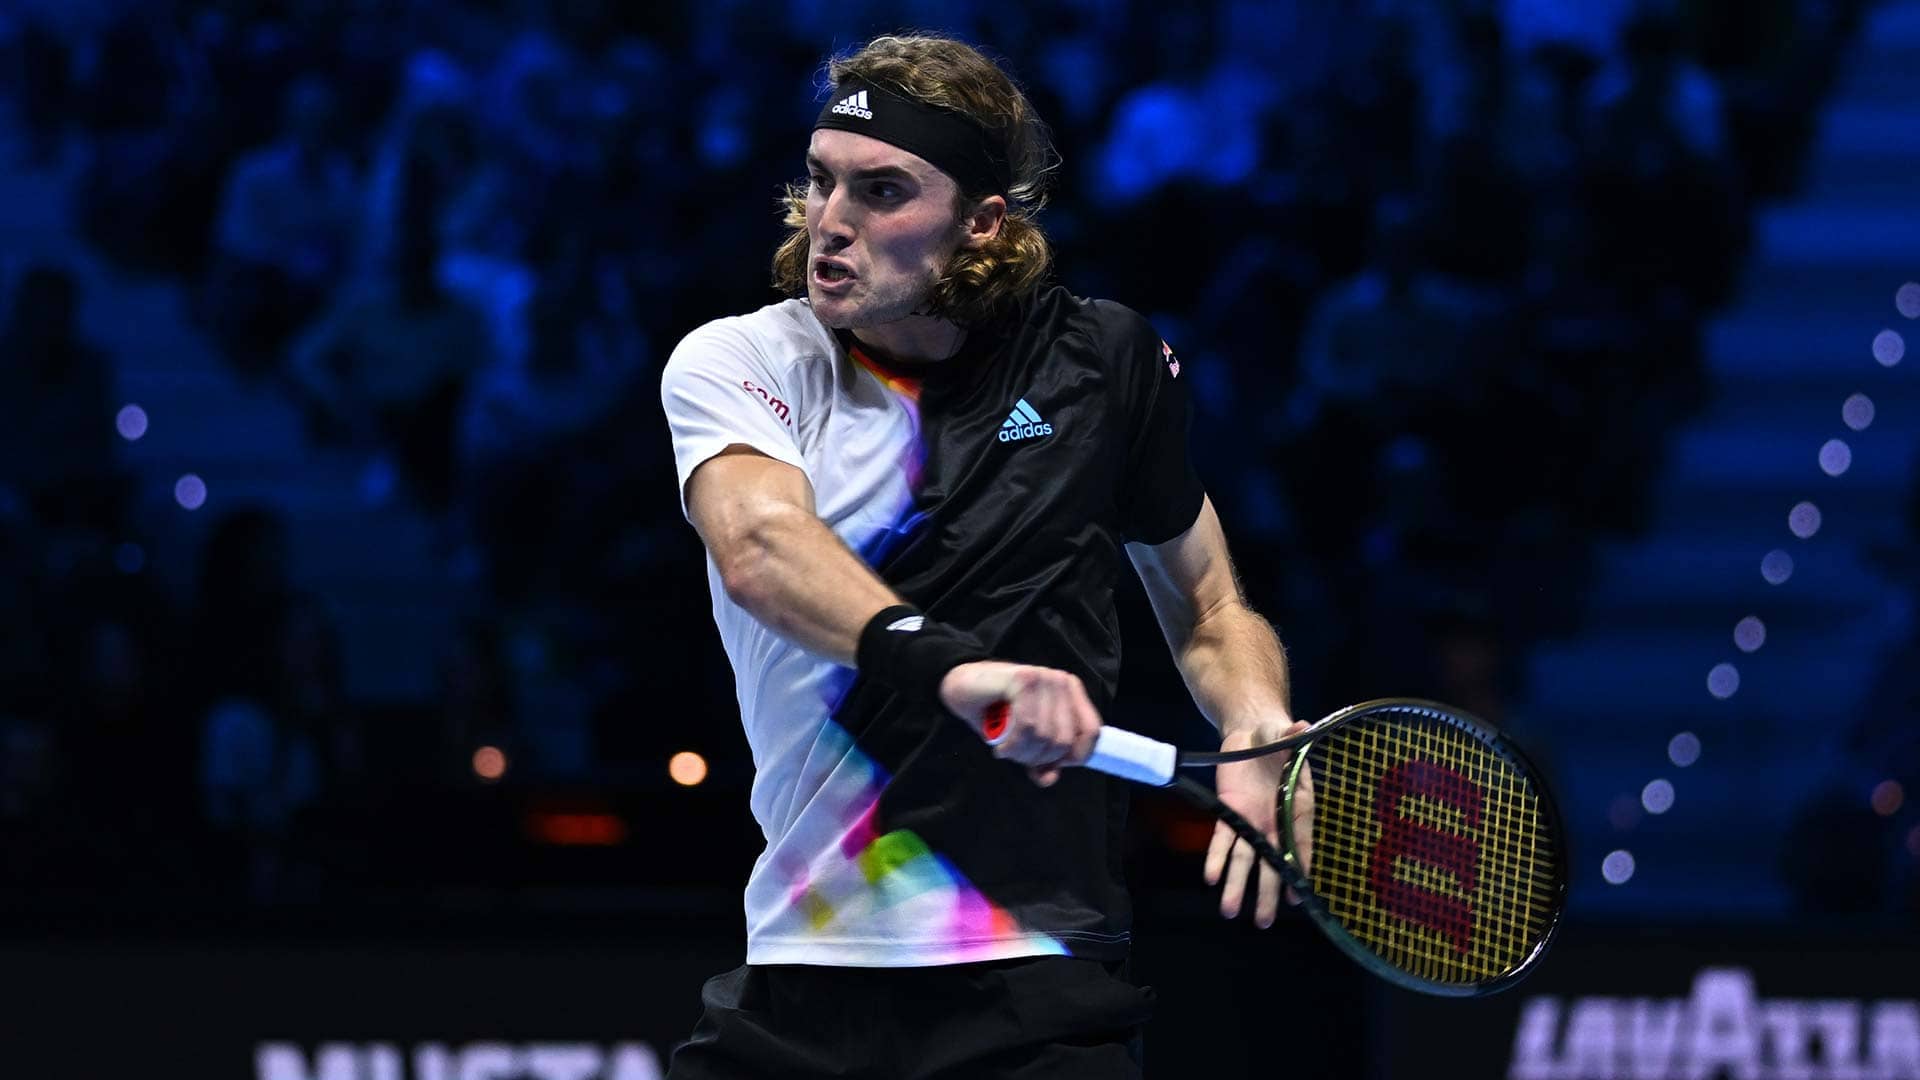 Stefanos Tsitsipas is seeking his second Nitto ATP Finals title this week in Turin.